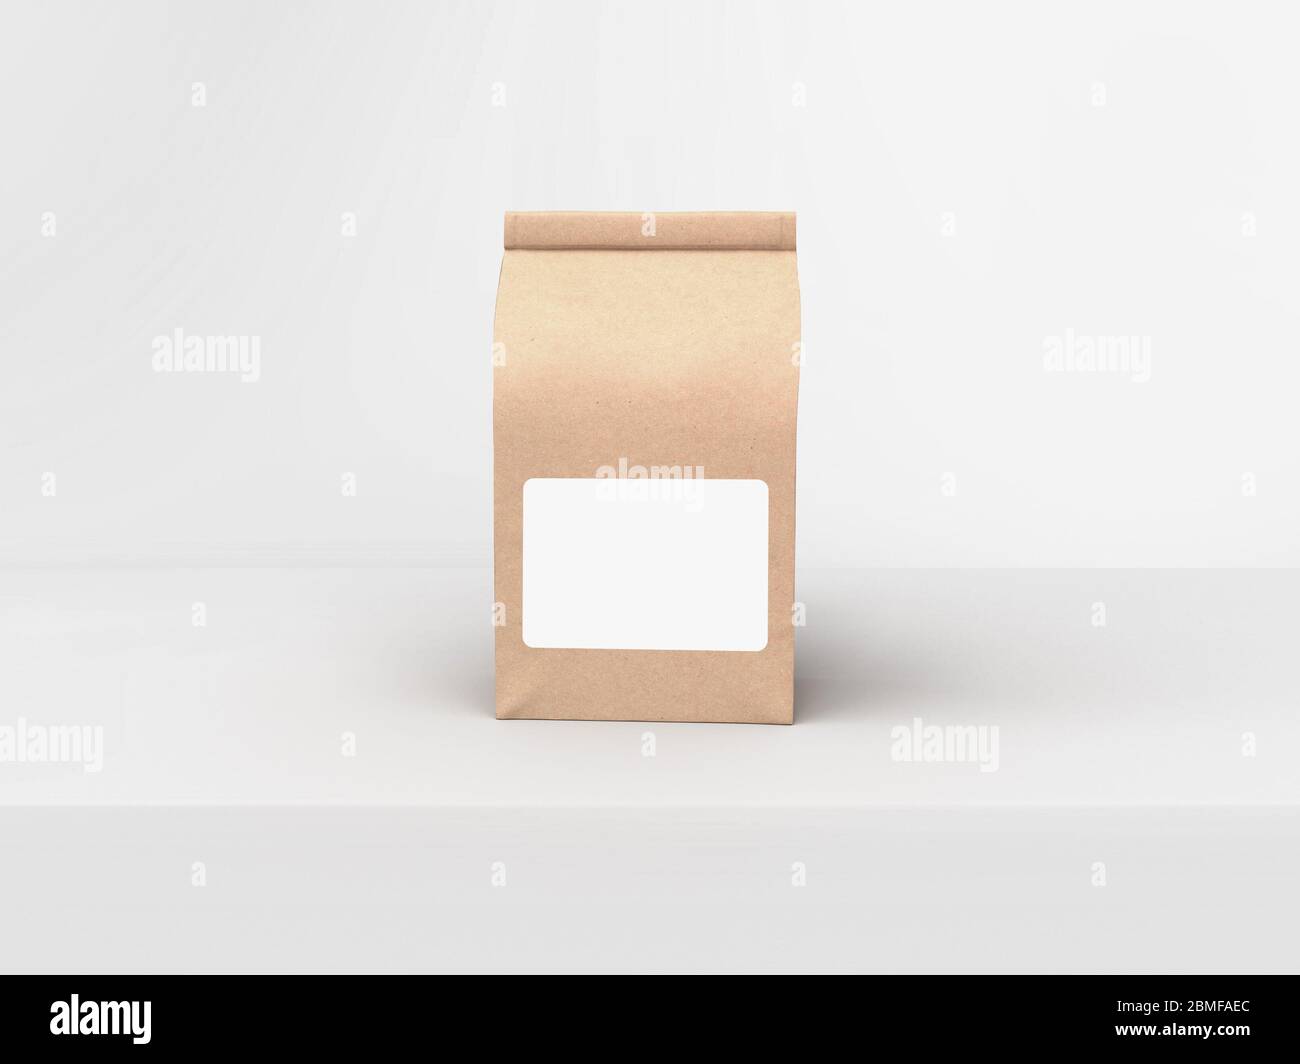 The coffee beam bag packaging mock-up design on light gray studio stage background Stock Photo